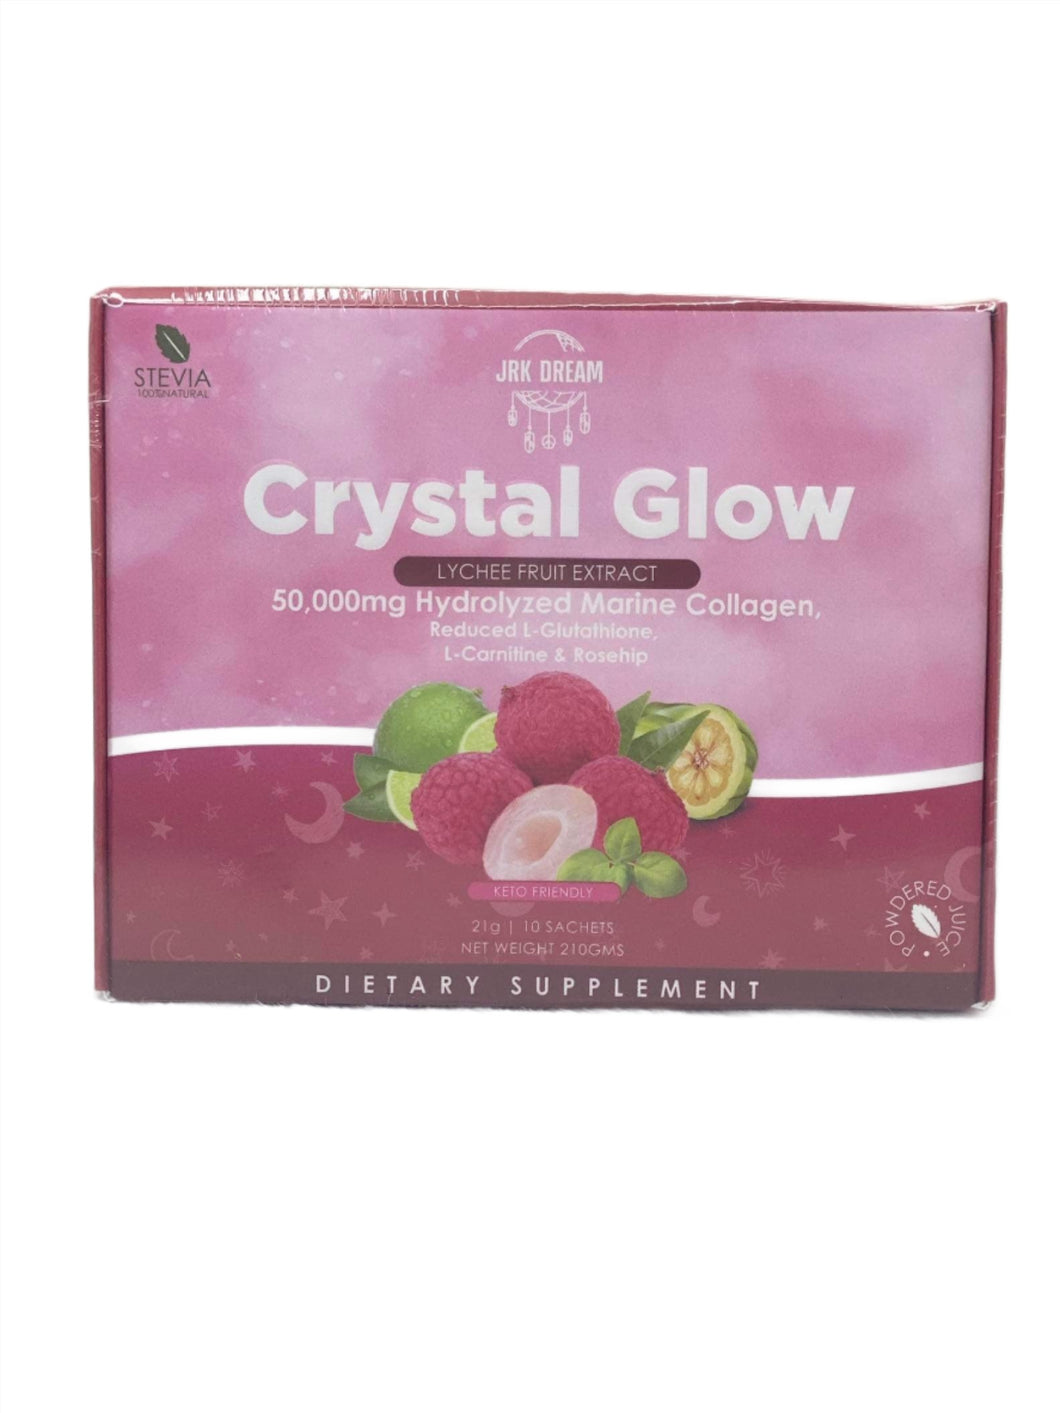 Crystal Glow Lychee Fruit Extract 10 sachets